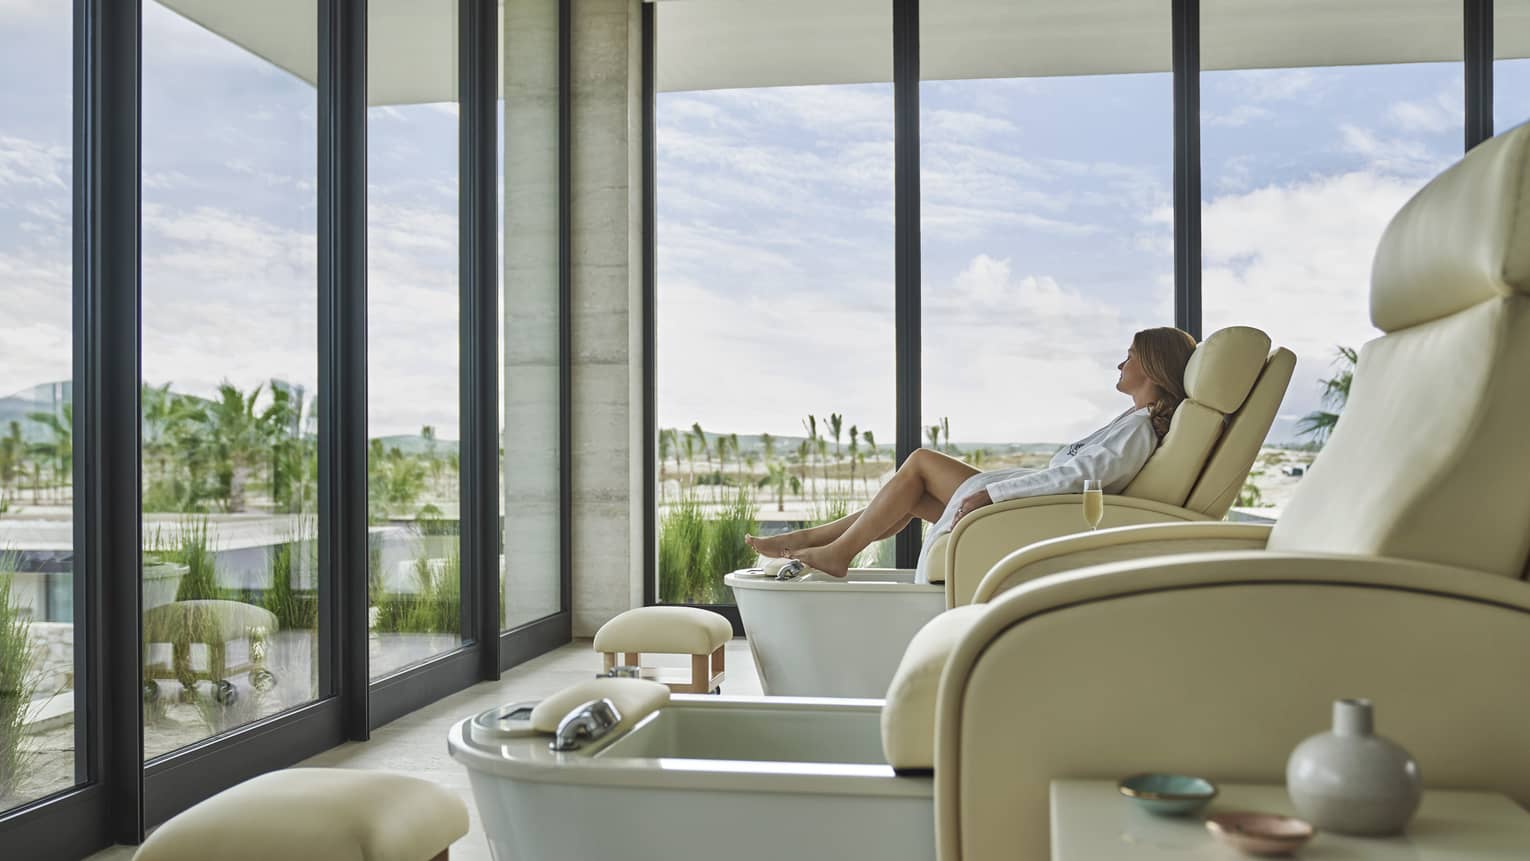 A woman in a pedicure chair looking out of large windows.